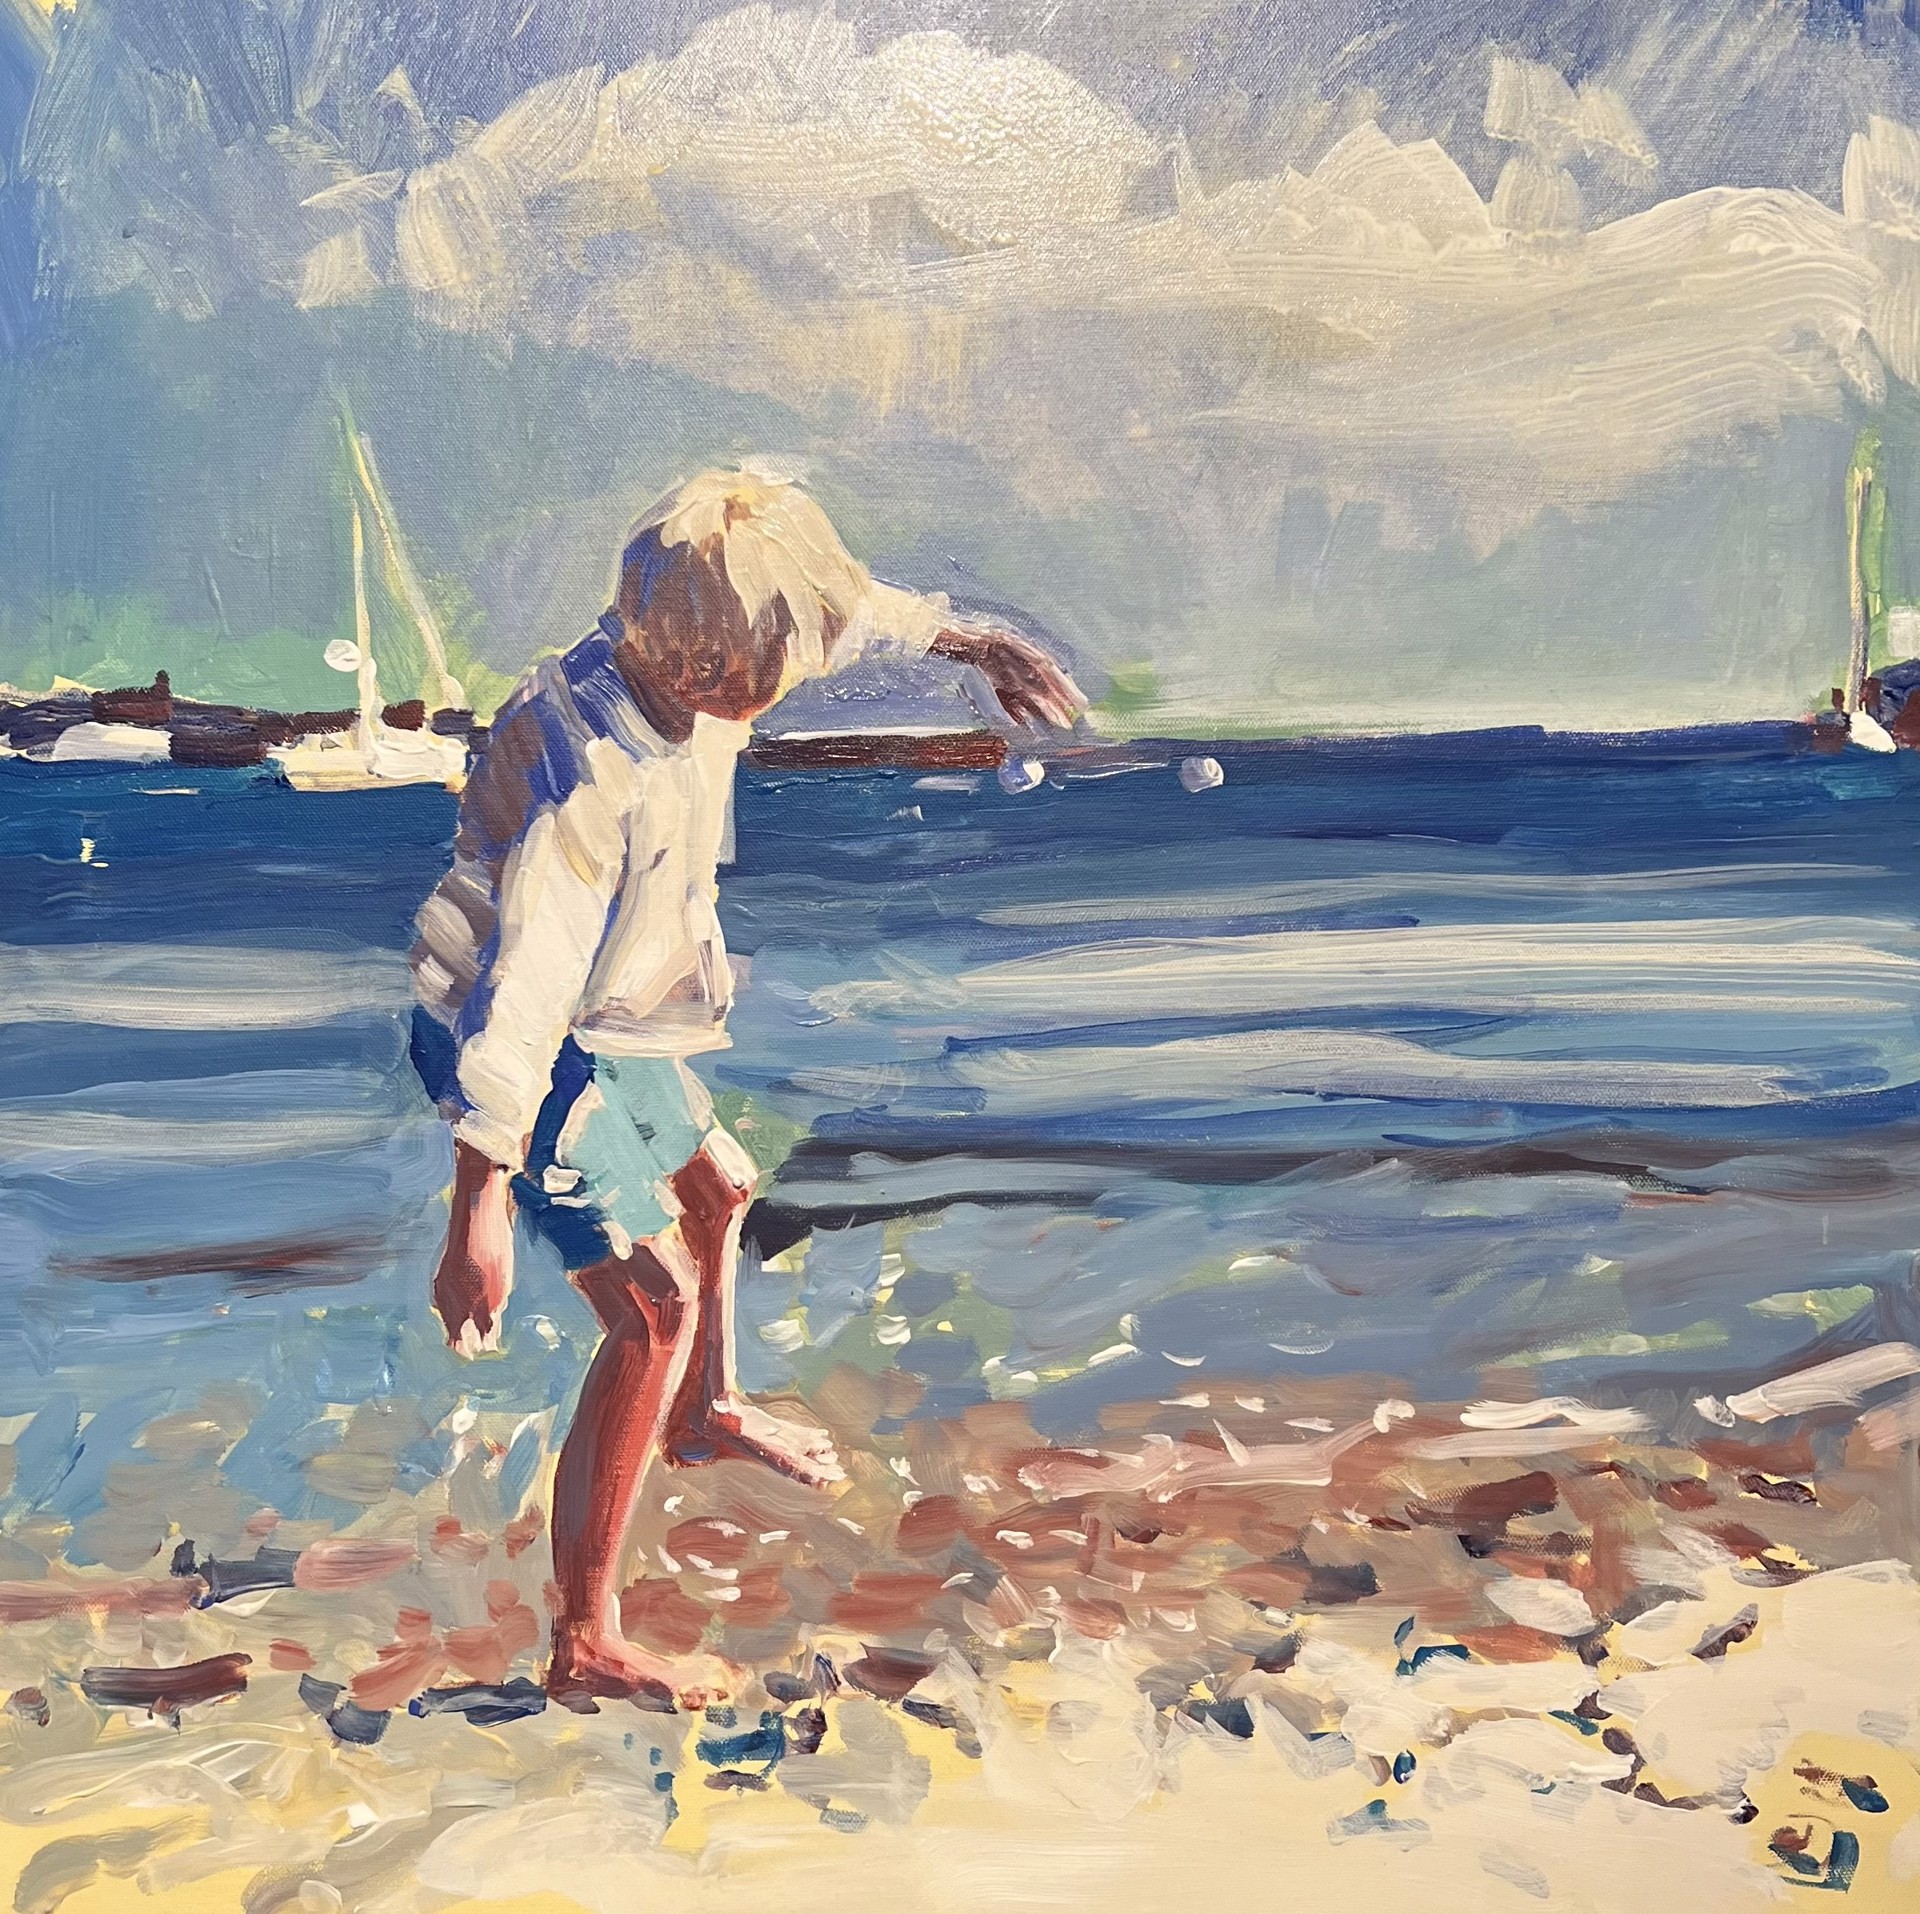 Tossing Pebbles in the Sea by Laura Lacambra Shubert